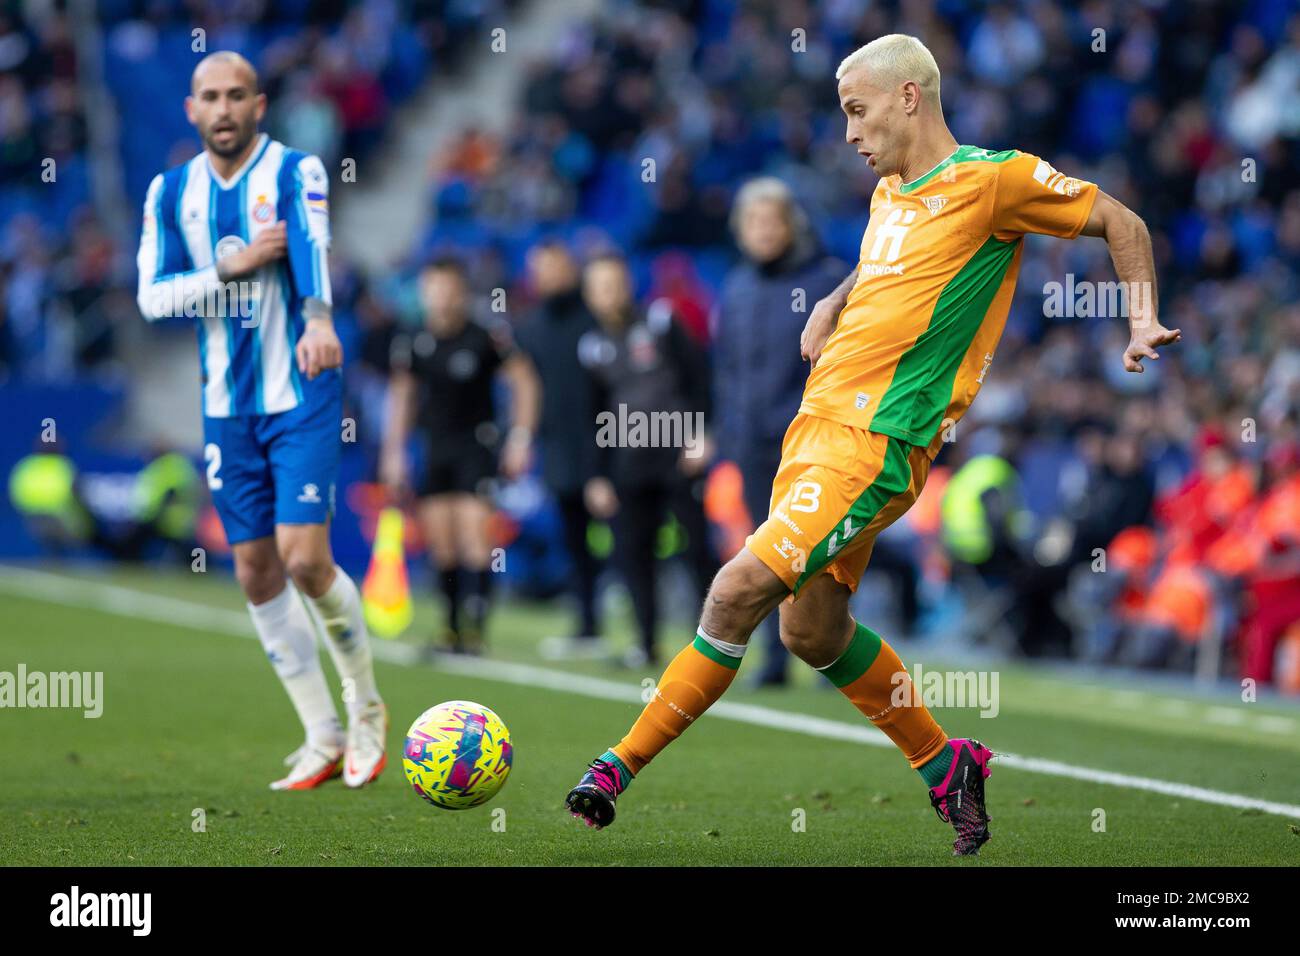 Sergio Canales of Real Betis Balompie during the Liga match between RCD Espanyol and Real Betis at RCDE Stadium in Cornella, Spain. Stock Photo